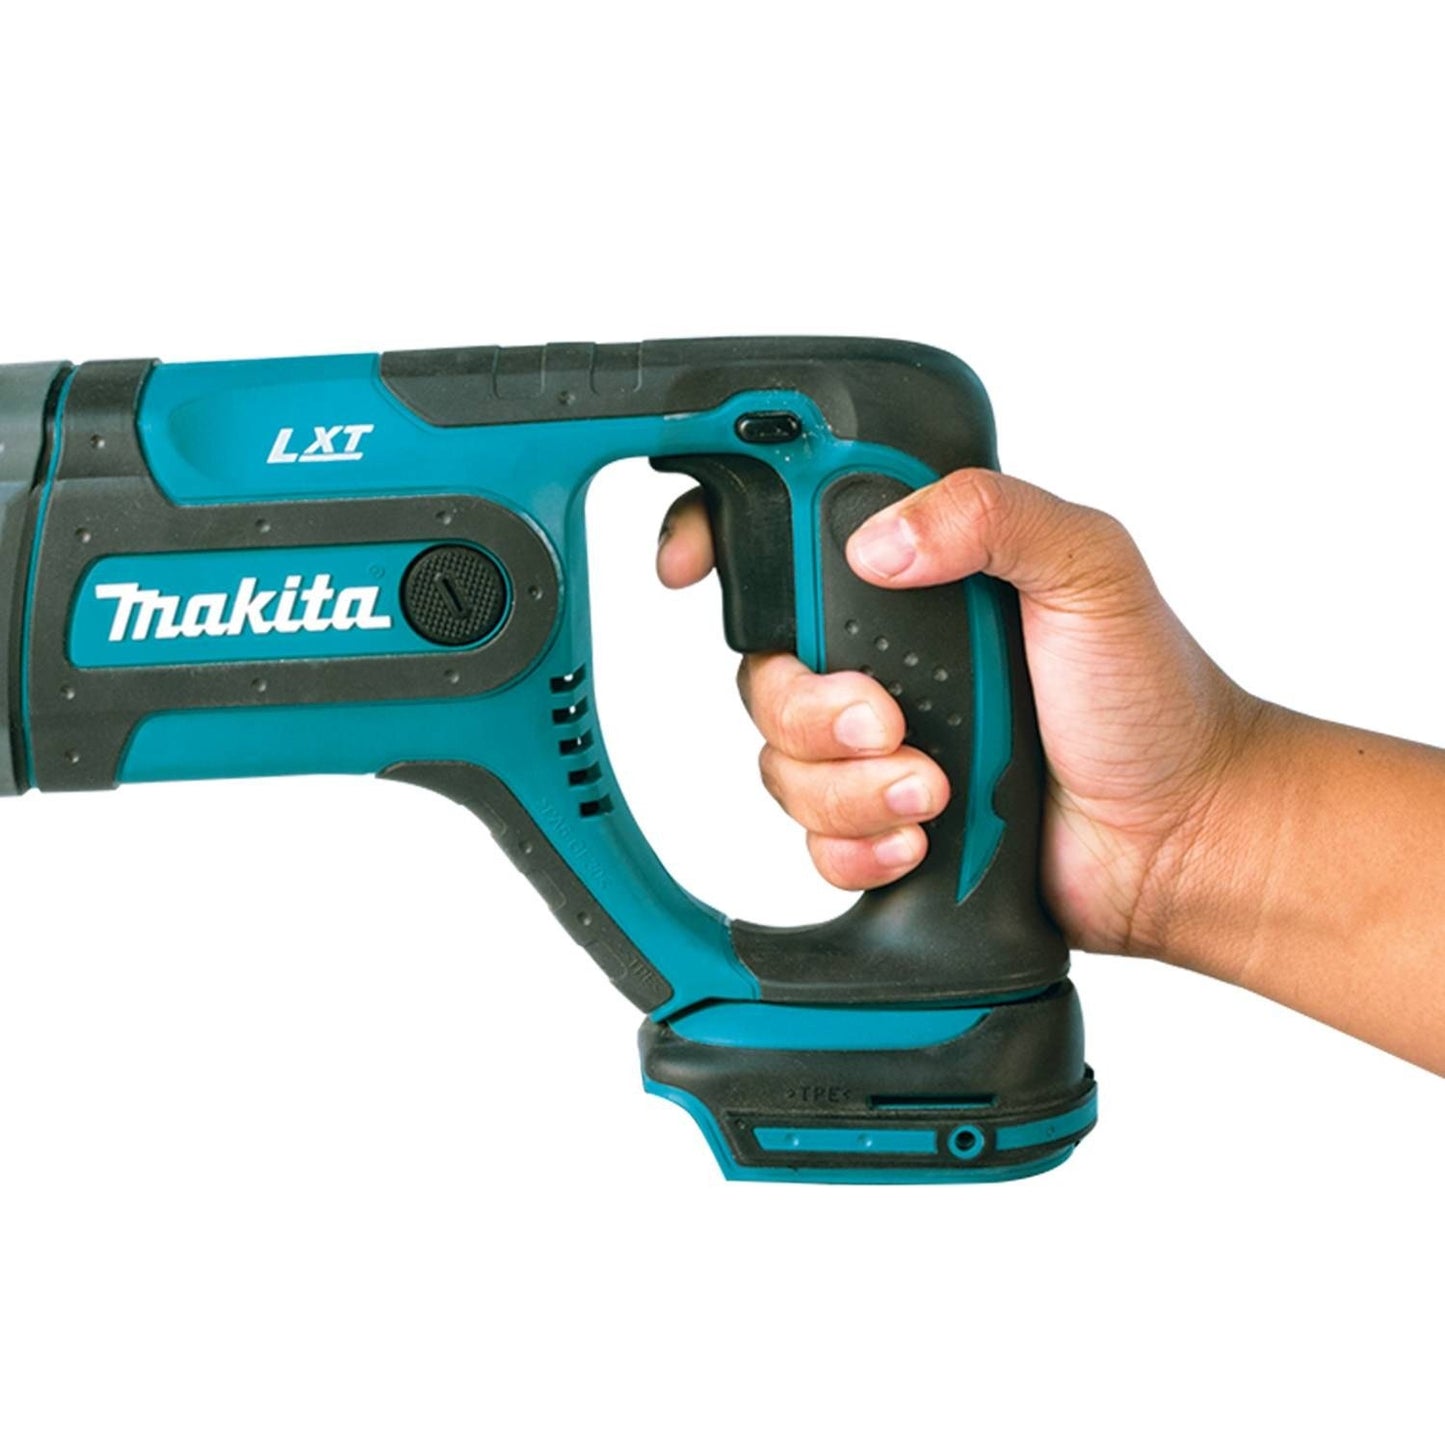 Makita XRH04Z 18V LXT® Lithium-Ion Cordless 7/8" Rotary Hammer, accepts SDS-PLUS bits, Tool Only